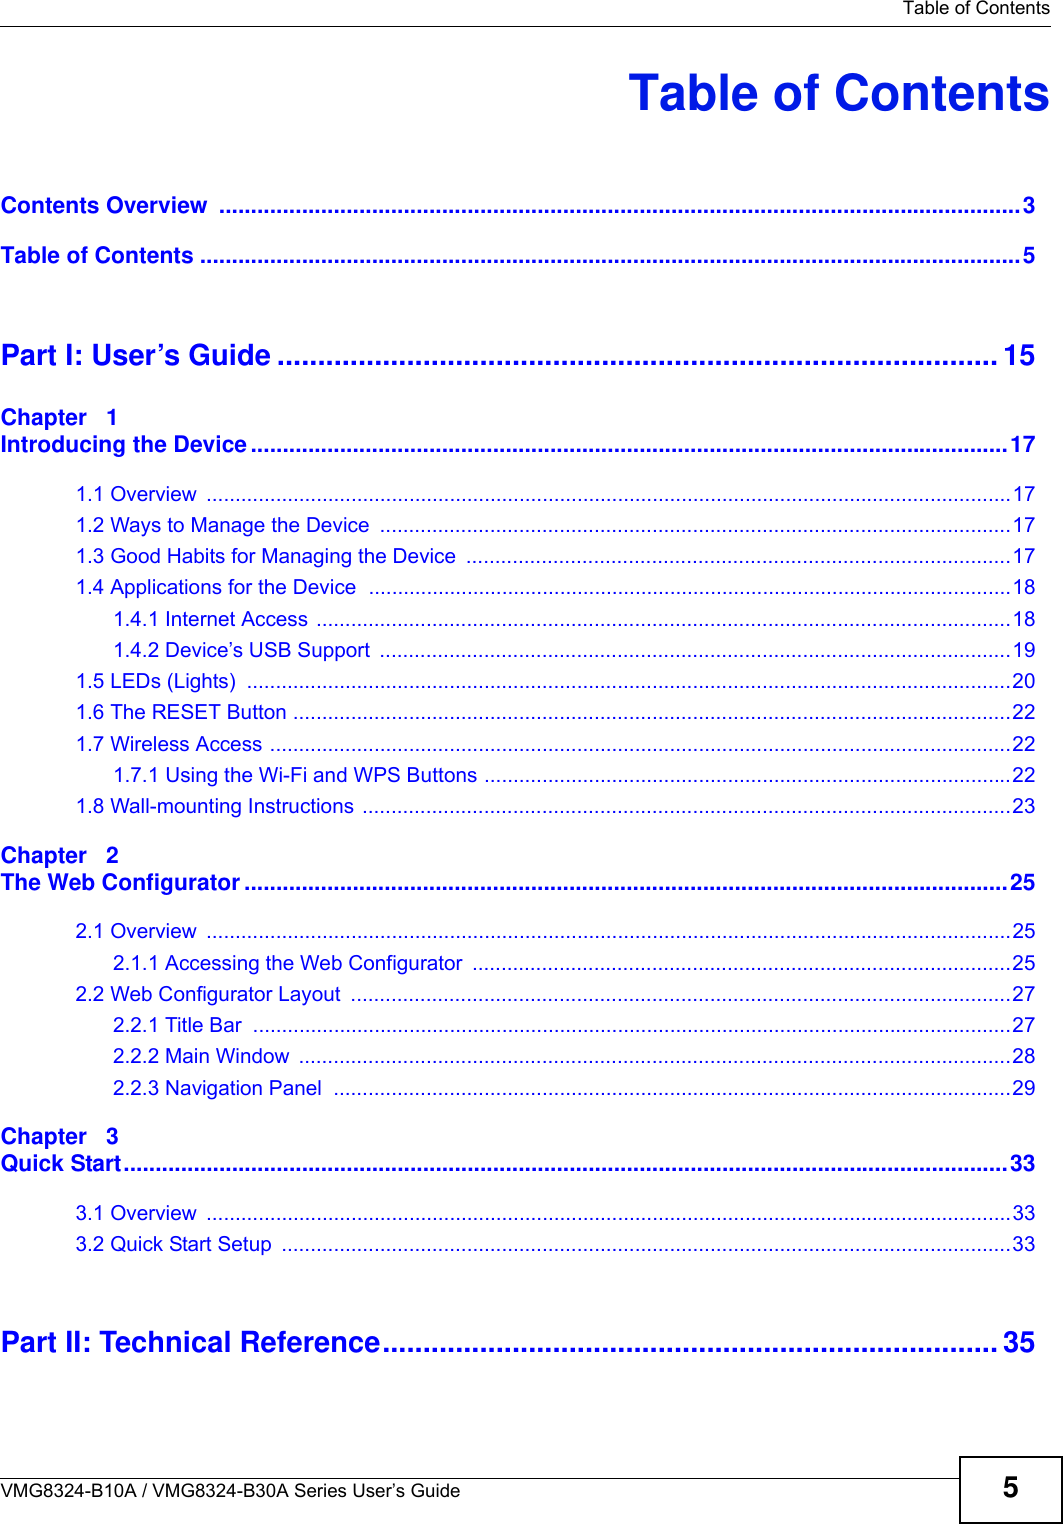   Table of ContentsVMG8324-B10A / VMG8324-B30A Series User’s Guide 5Table of ContentsContents Overview  ..............................................................................................................................3Table of Contents .................................................................................................................................5Part I: User’s Guide ......................................................................................... 15Chapter   1Introducing the Device .......................................................................................................................171.1 Overview  ...........................................................................................................................................171.2 Ways to Manage the Device  .............................................................................................................171.3 Good Habits for Managing the Device  ..............................................................................................171.4 Applications for the Device  ...............................................................................................................181.4.1 Internet Access ........................................................................................................................181.4.2 Device’s USB Support  .............................................................................................................191.5 LEDs (Lights)  ....................................................................................................................................201.6 The RESET Button ............................................................................................................................221.7 Wireless Access ................................................................................................................................221.7.1 Using the Wi-Fi and WPS Buttons ...........................................................................................221.8 Wall-mounting Instructions ................................................................................................................23Chapter   2The Web Configurator ........................................................................................................................252.1 Overview  ...........................................................................................................................................252.1.1 Accessing the Web Configurator  .............................................................................................252.2 Web Configurator Layout  ..................................................................................................................272.2.1 Title Bar  ...................................................................................................................................272.2.2 Main Window  ...........................................................................................................................282.2.3 Navigation Panel  .....................................................................................................................29Chapter   3Quick Start...........................................................................................................................................333.1 Overview  ...........................................................................................................................................333.2 Quick Start Setup  ..............................................................................................................................33Part II: Technical Reference............................................................................ 35